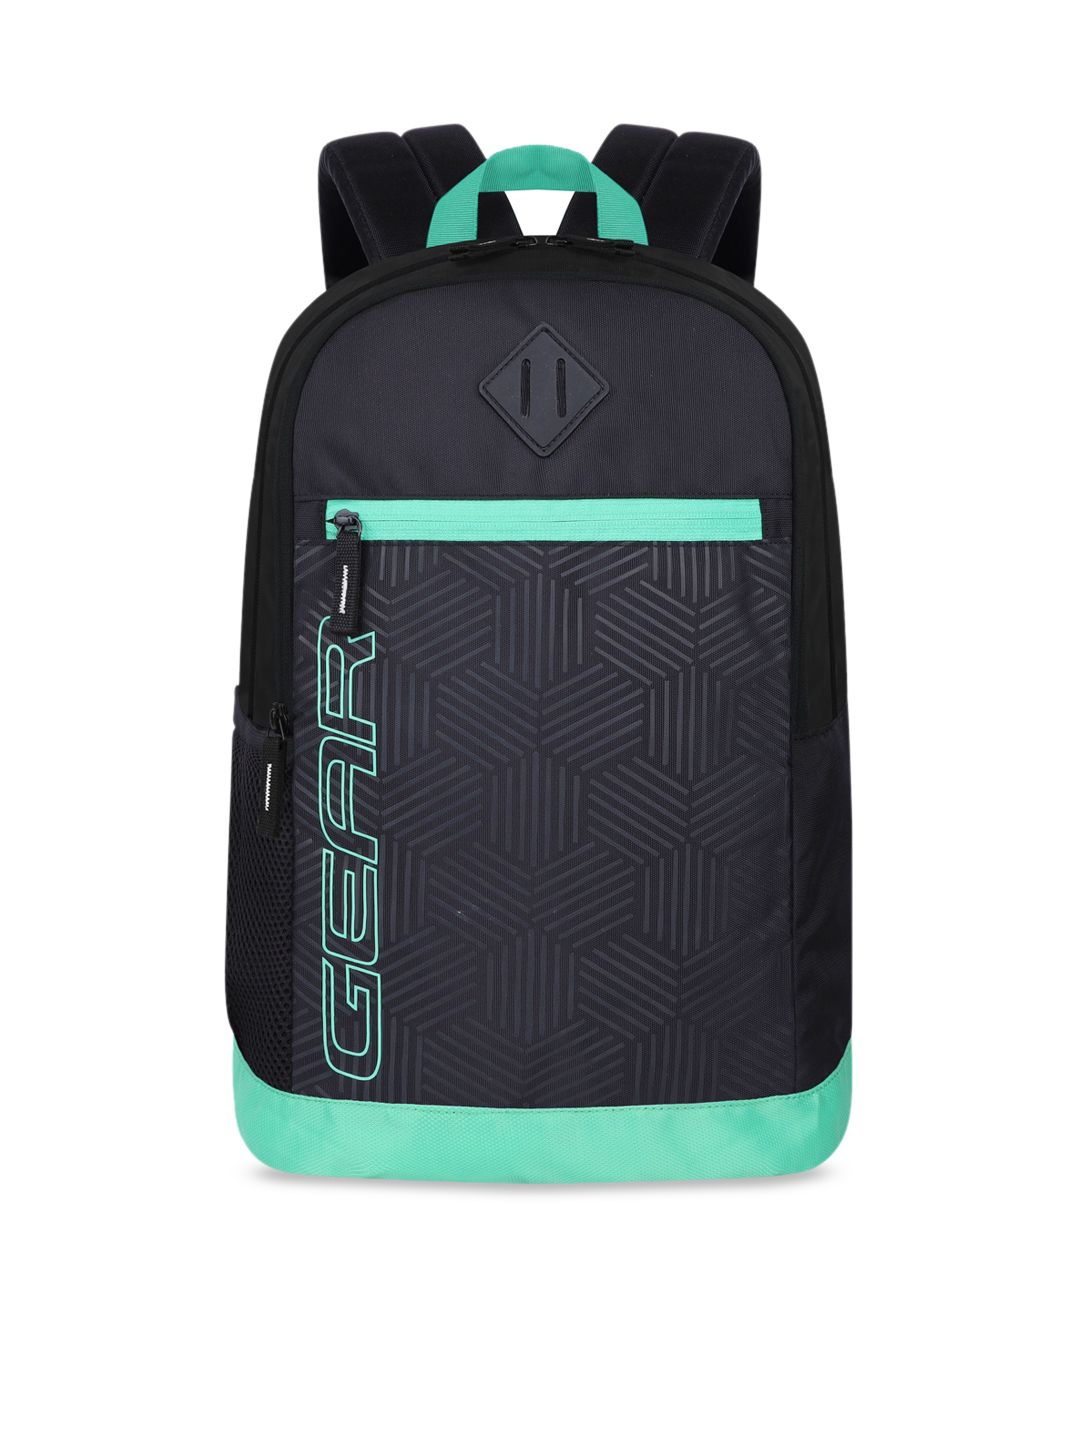 Gear Unisex Black & Green Brand Logo Backpack Price in India